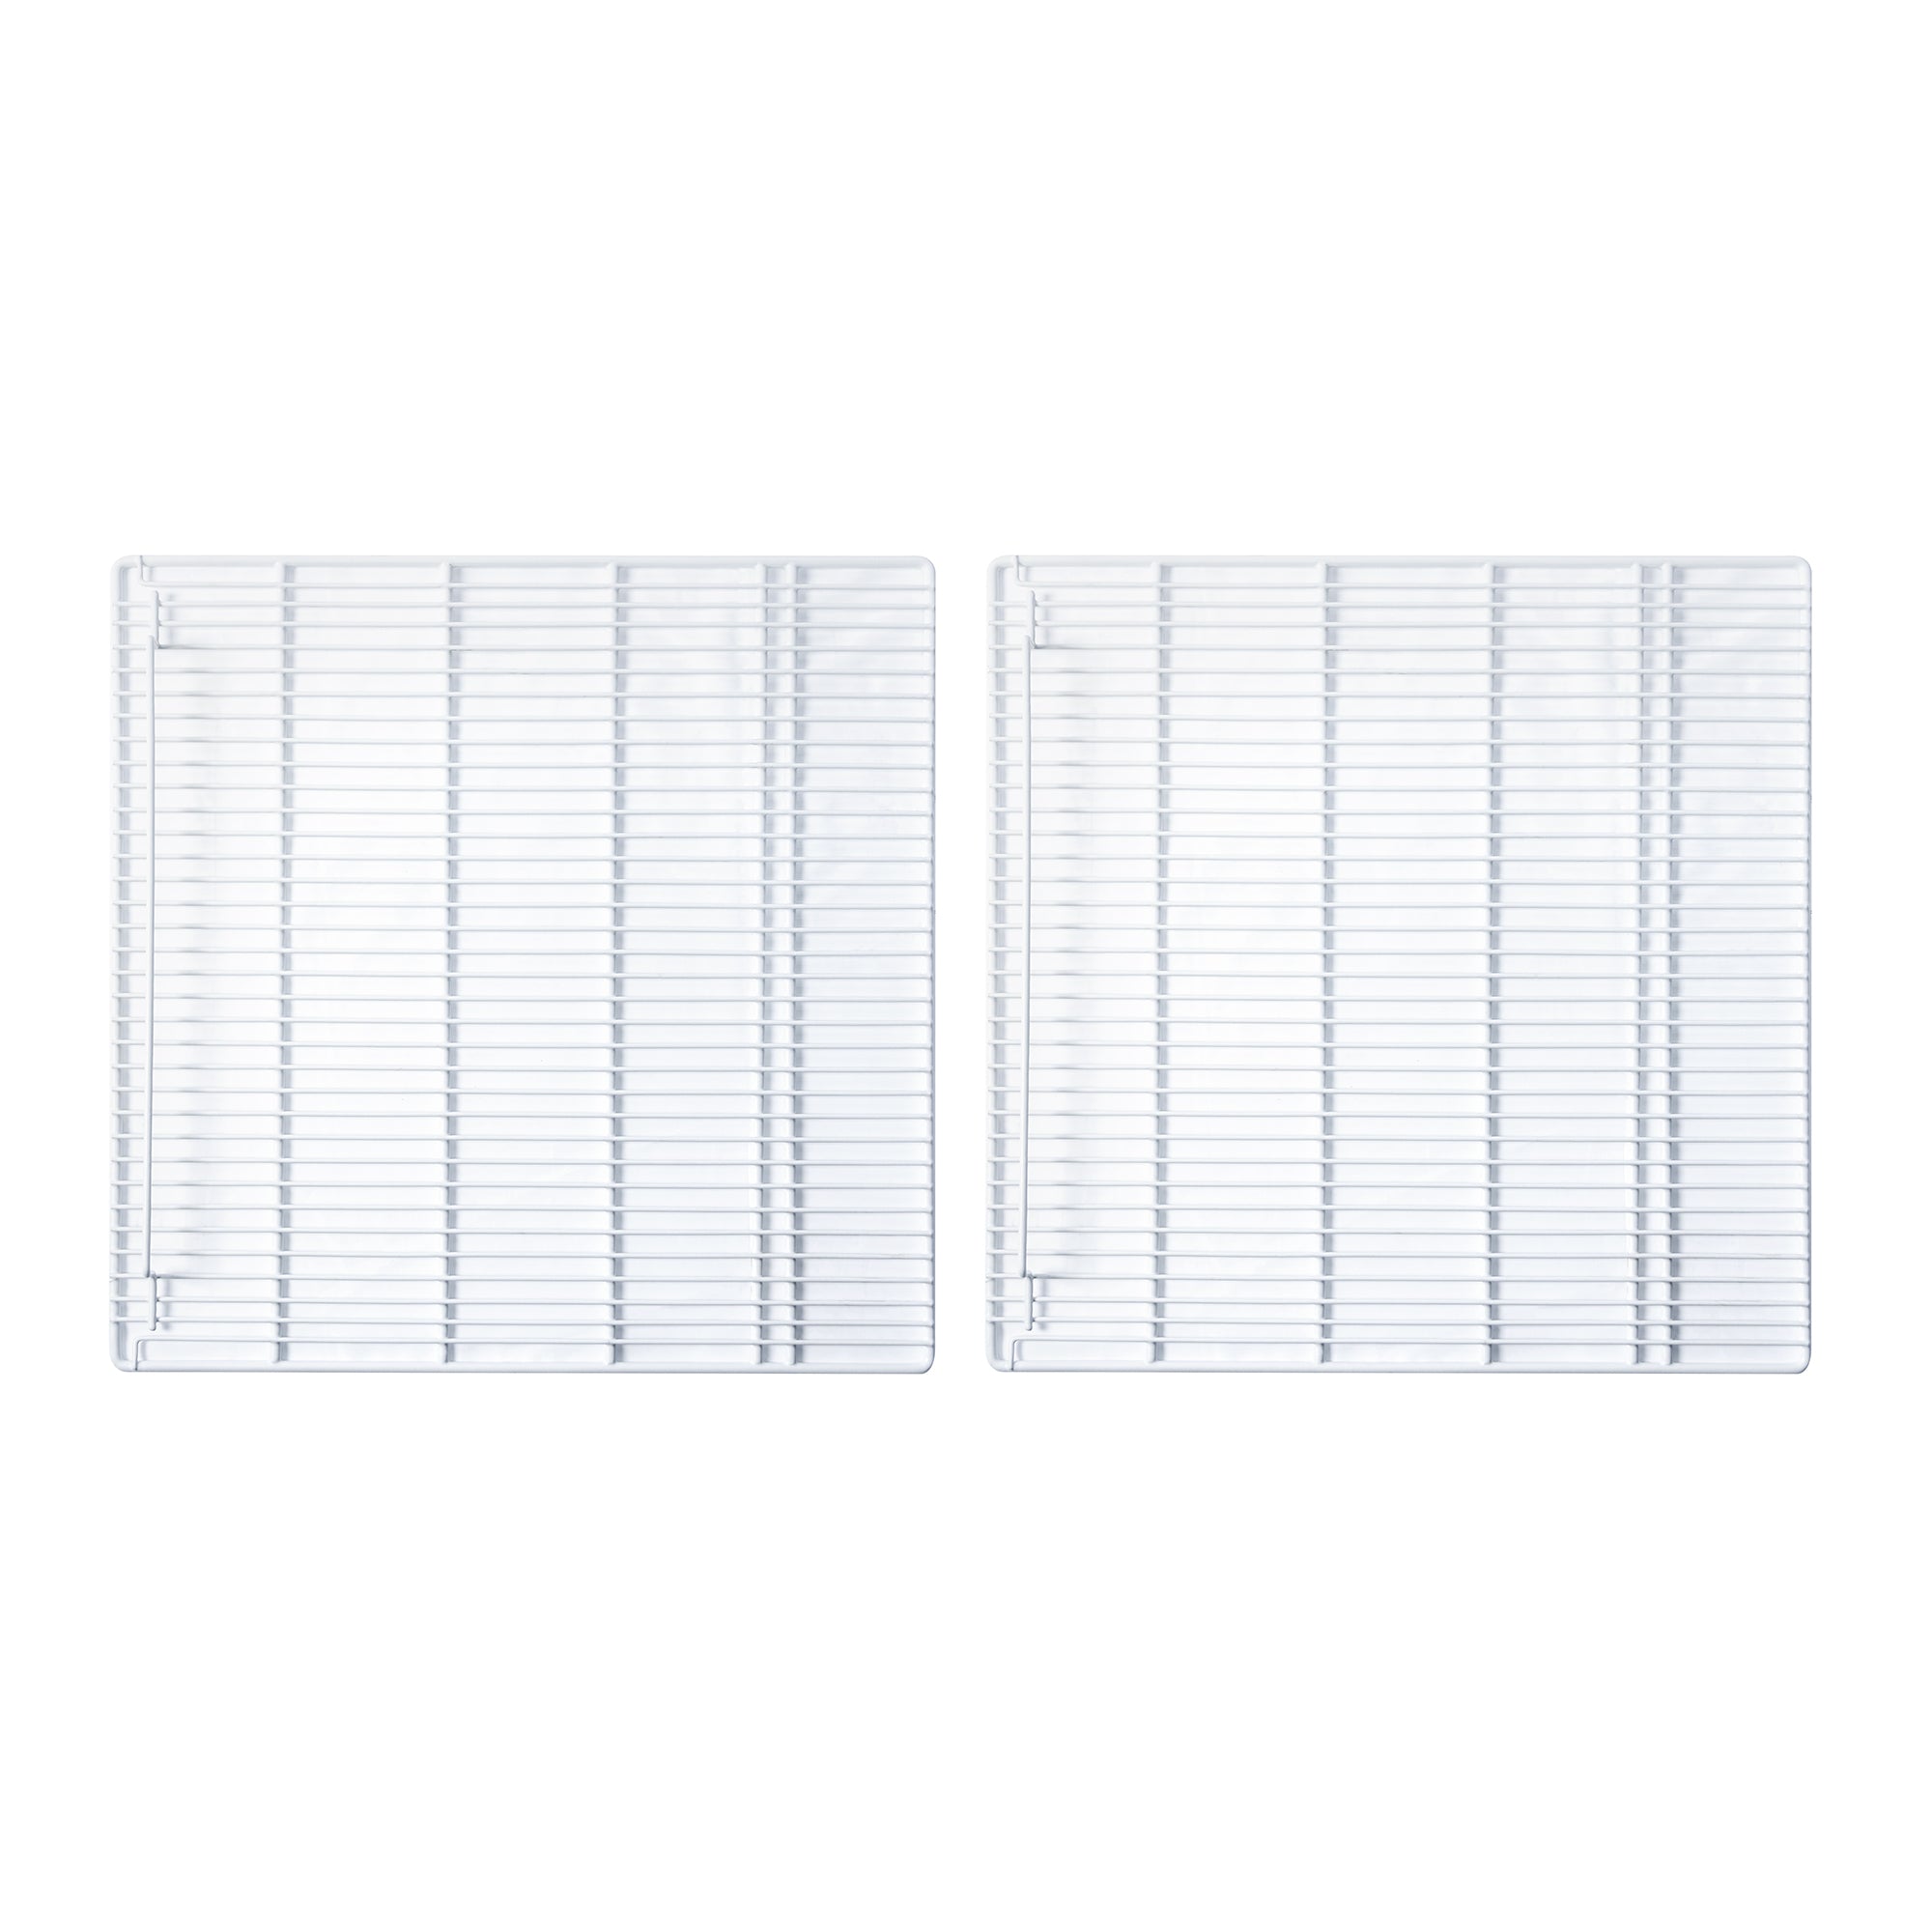 Adjustable Epoxy-coated Wire Shelves (Left and Right) for SC2090F, SC2090FT - Enhance Organization with Sturdy Utility Shelves - (White) Commercial Refrigerator Shelves Set of 2